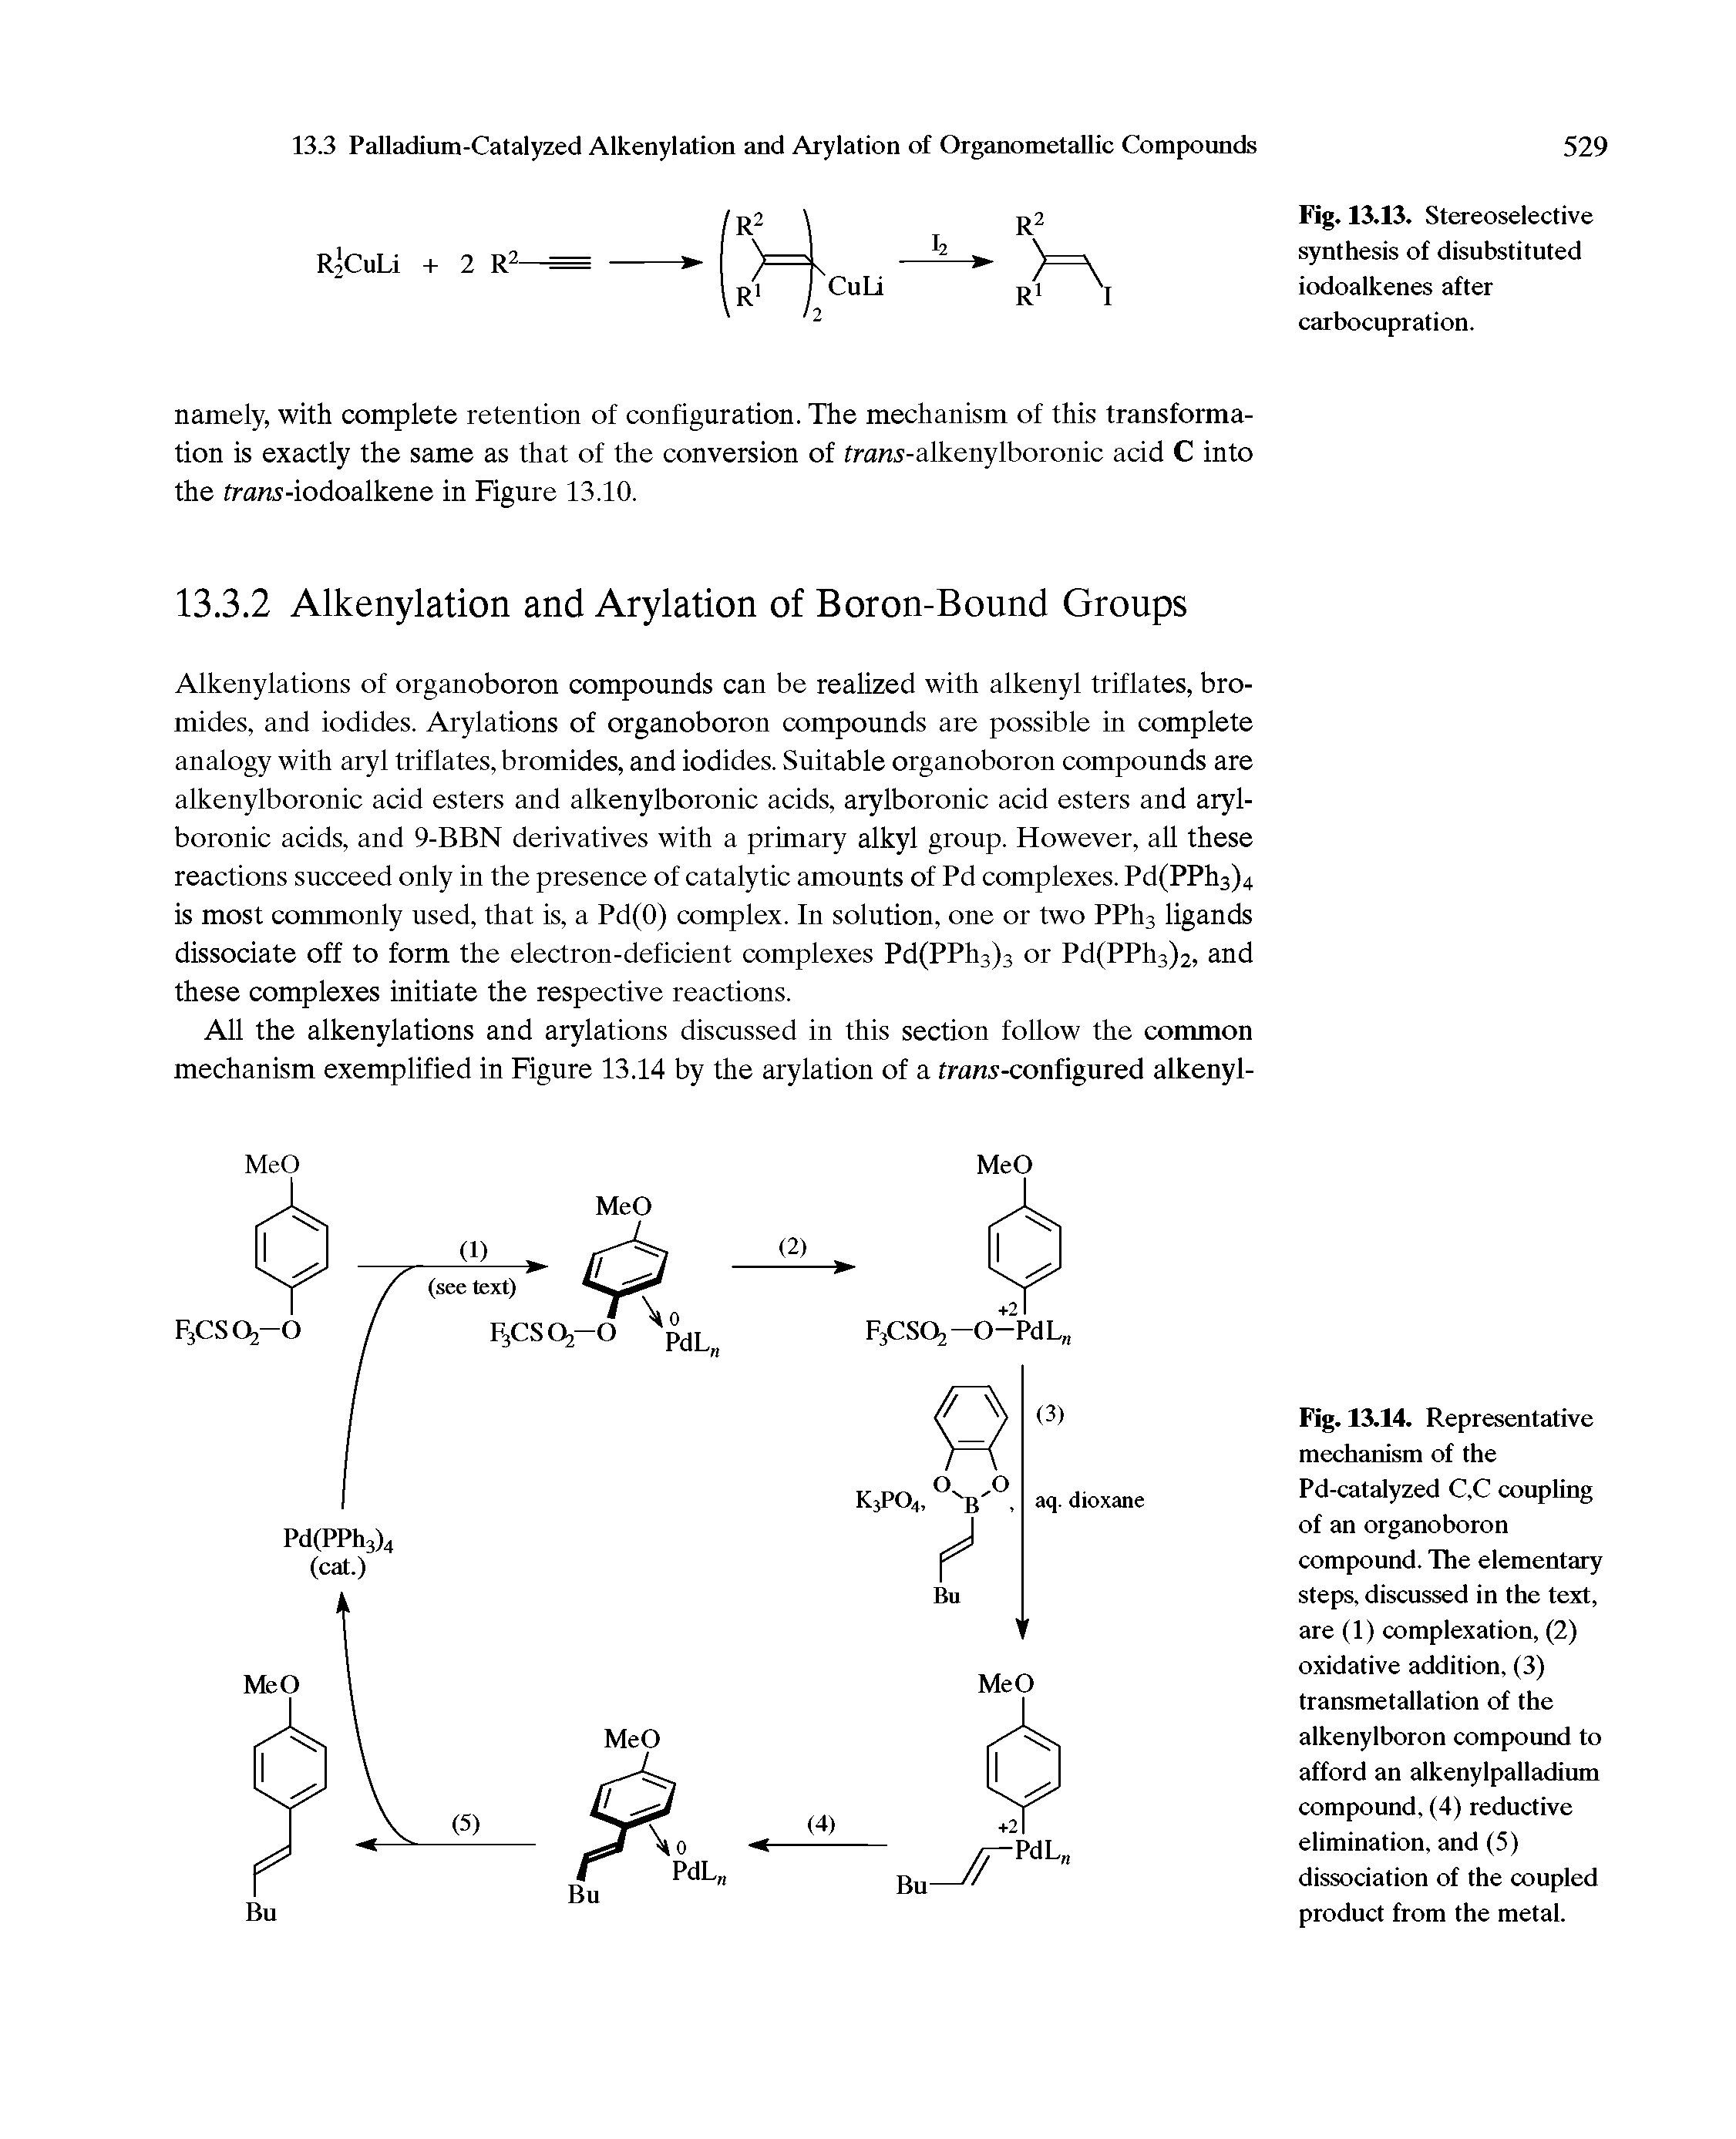 Fig. 13.14. Representative mechanism of the Pd-catalyzed C,C coupling of an organoboron compound. The elementary steps, discussed in the text, are (1) complexation, (2) oxidative addition, (3) transmetallation of the alkenylboron compound to afford an alkenylpalladium compound, (4) reductive elimination, and (5) dissociation of the coupled product from the metal.